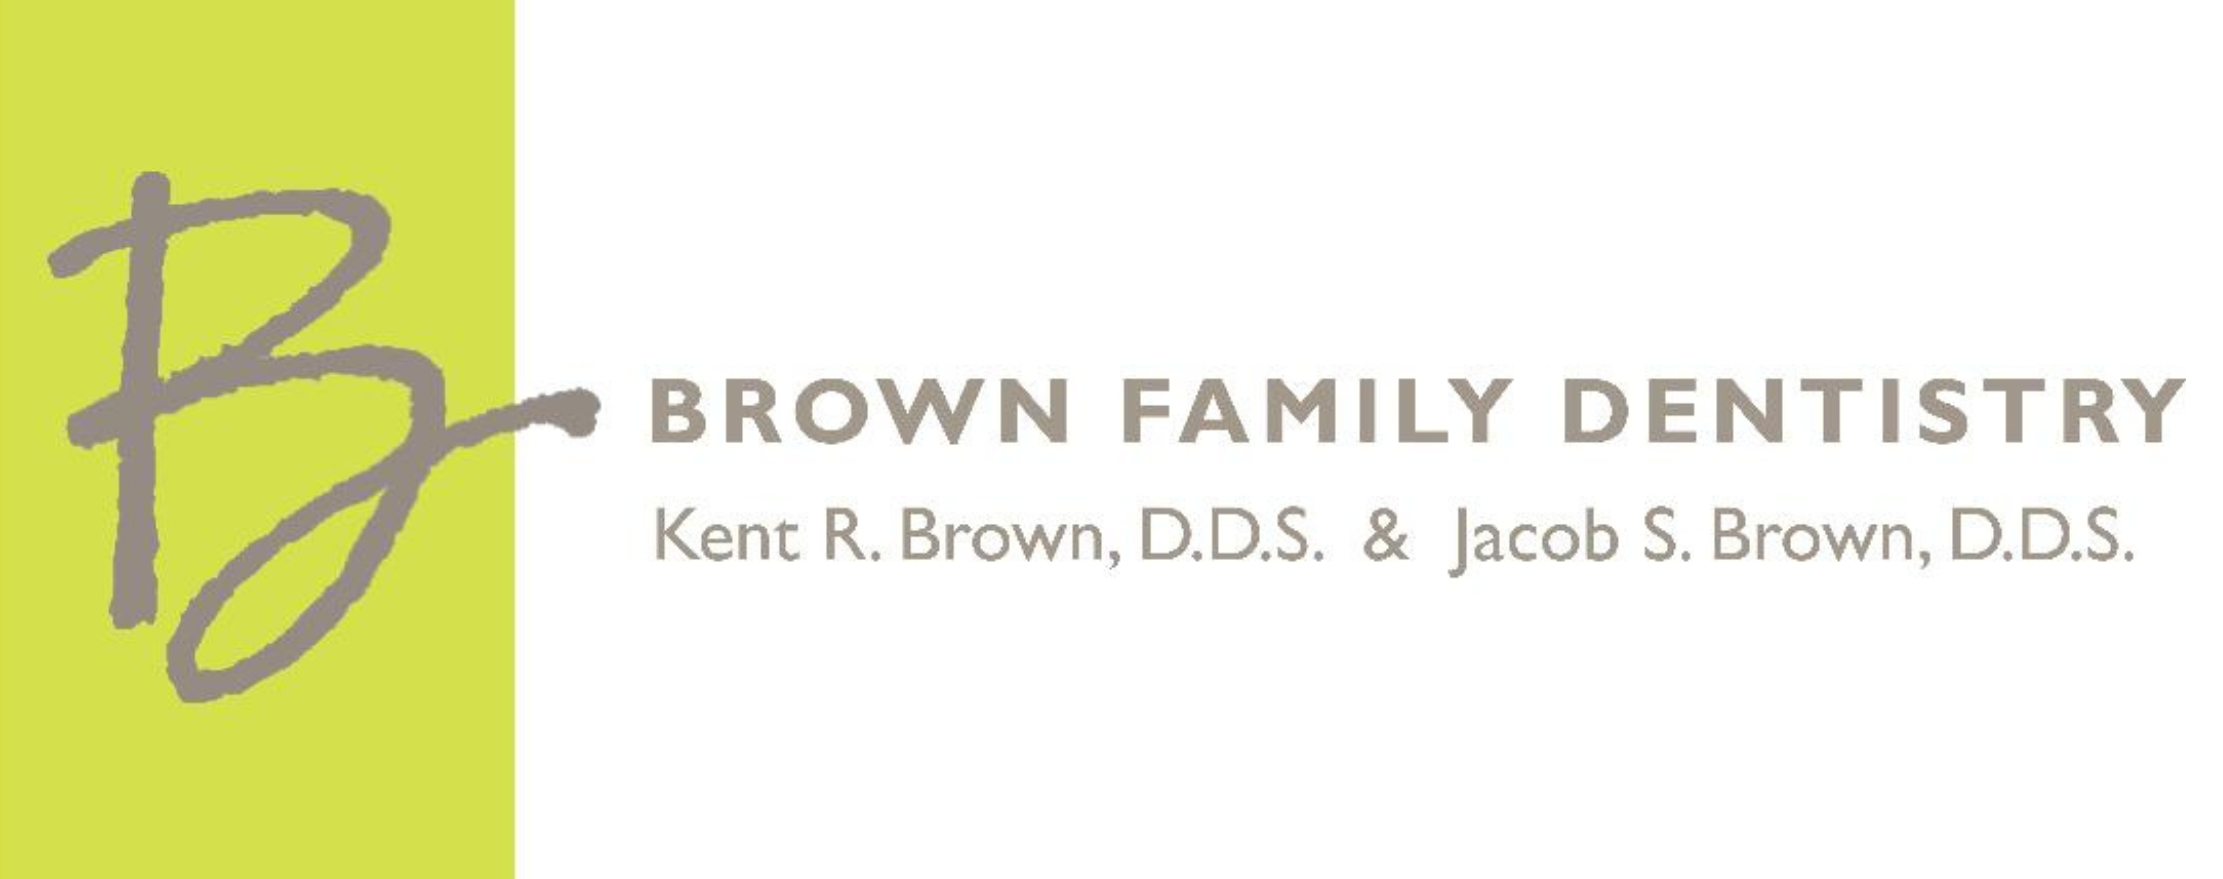 Brown Family Dentistry $250.png